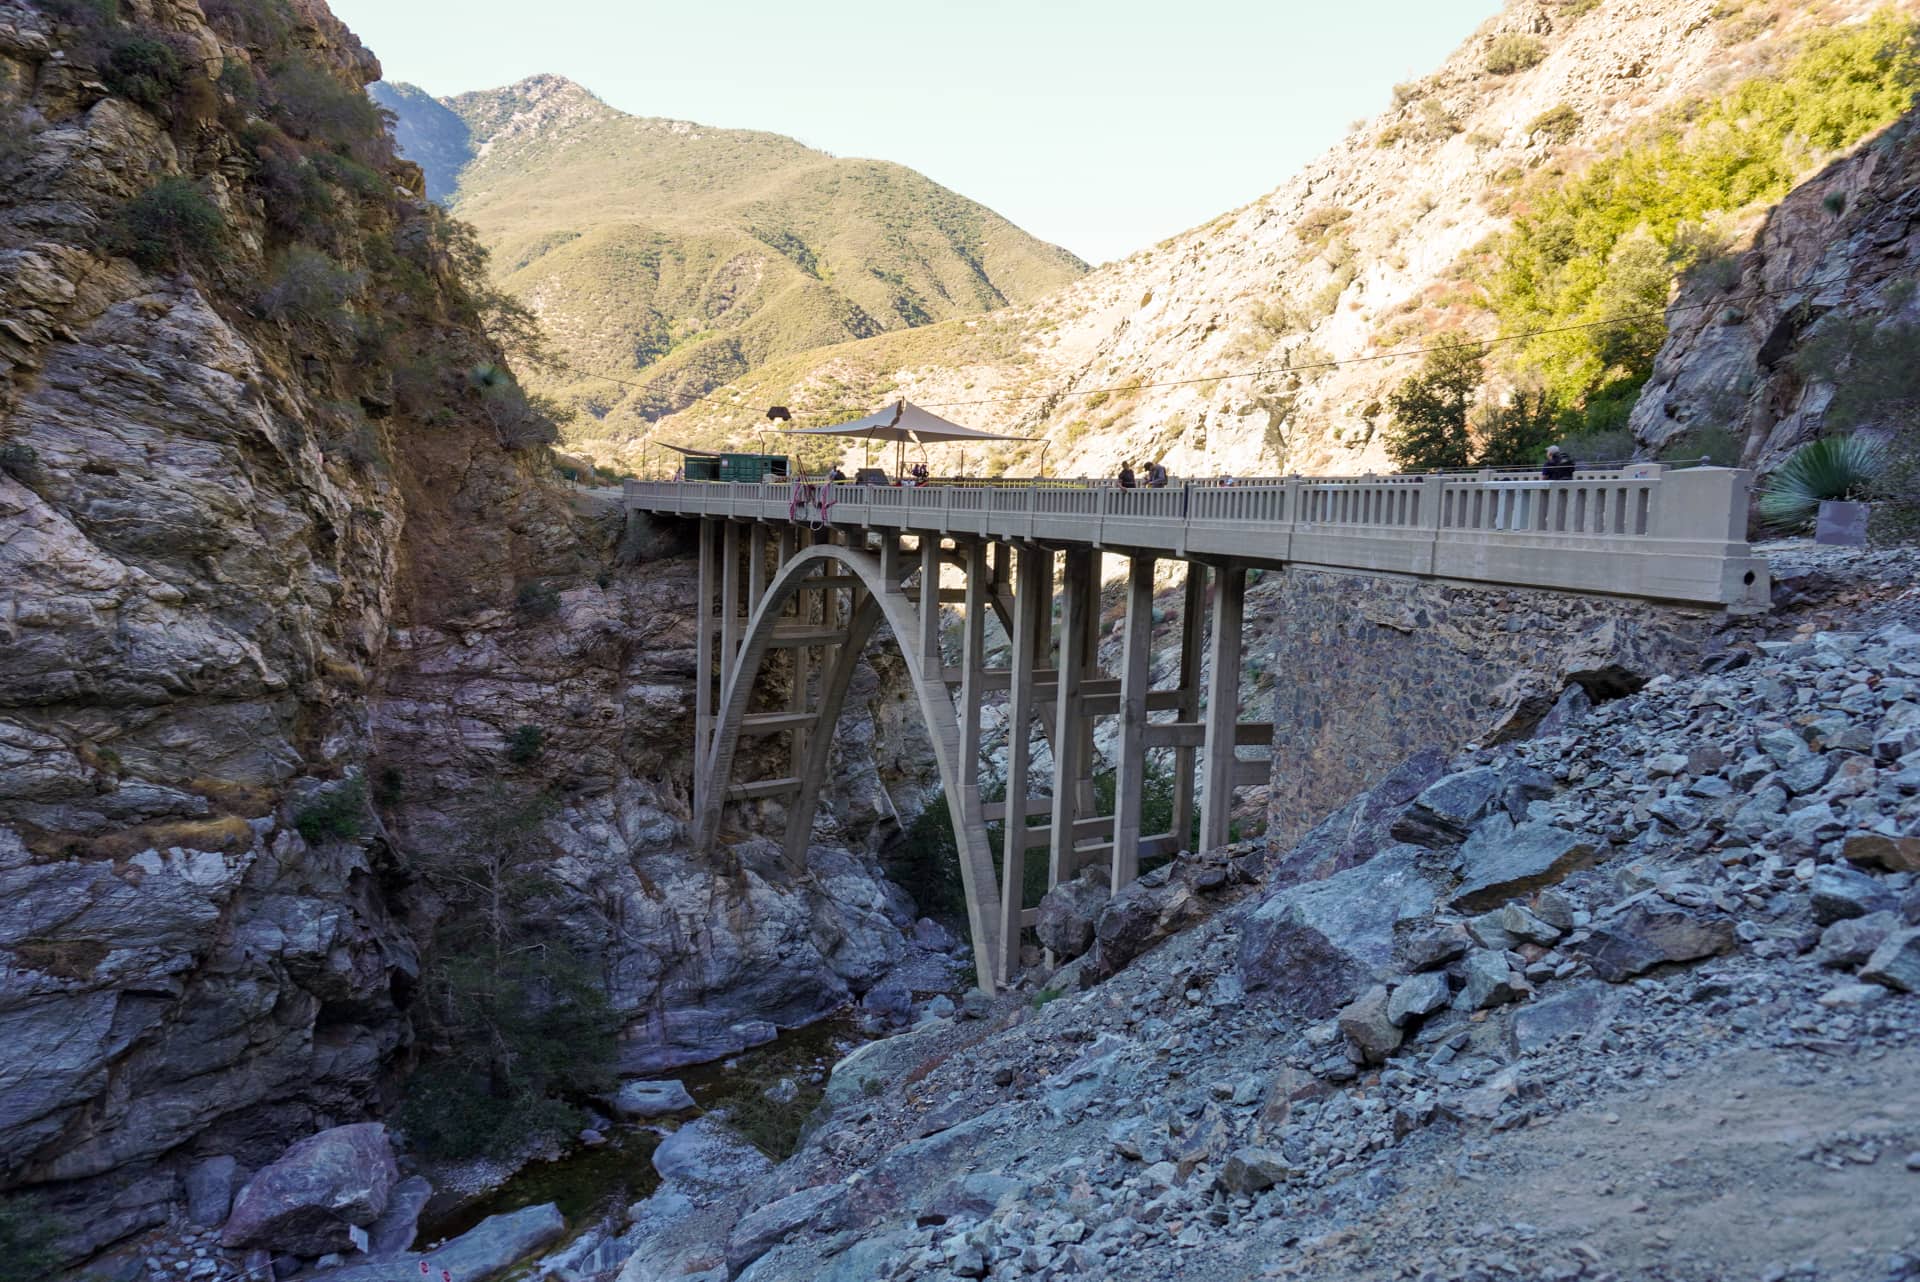 The Bridge to Nowhere, an arch bridge surrounded by mountains, perched above a river gorge